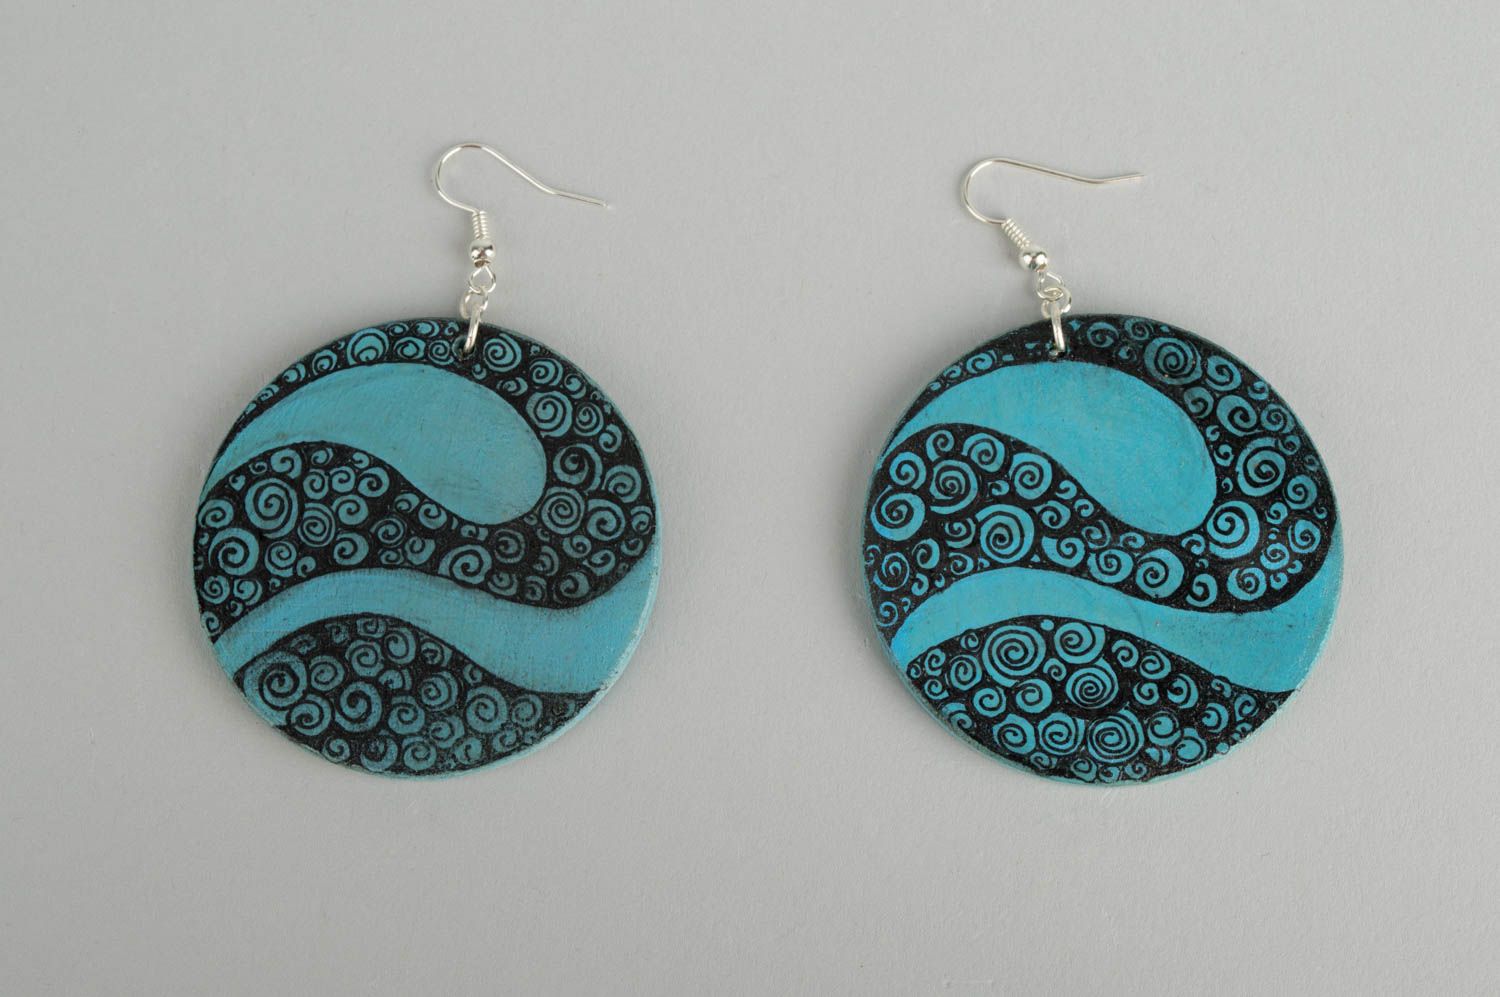 Fashion earrings wooden jewelry handcrafted jewelry designer accessories photo 2